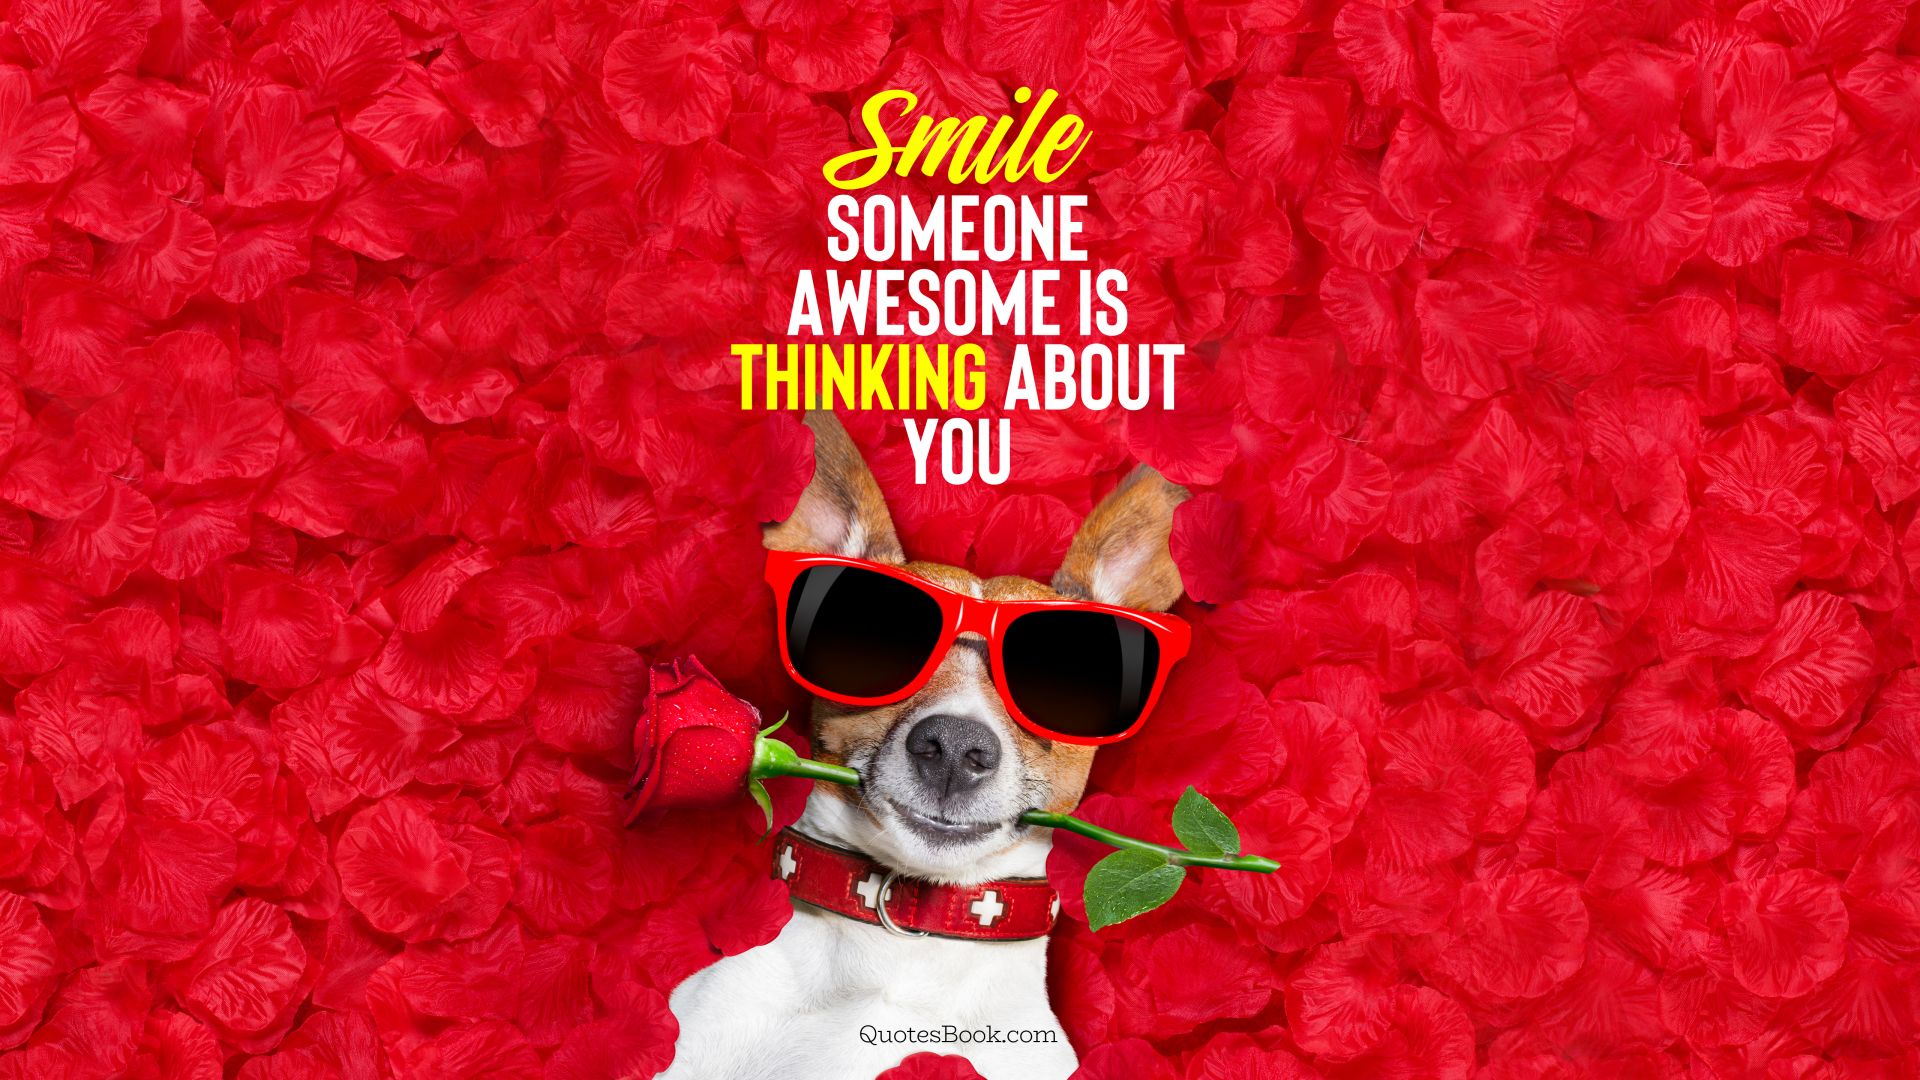 Smile someone awesome is thinking about you